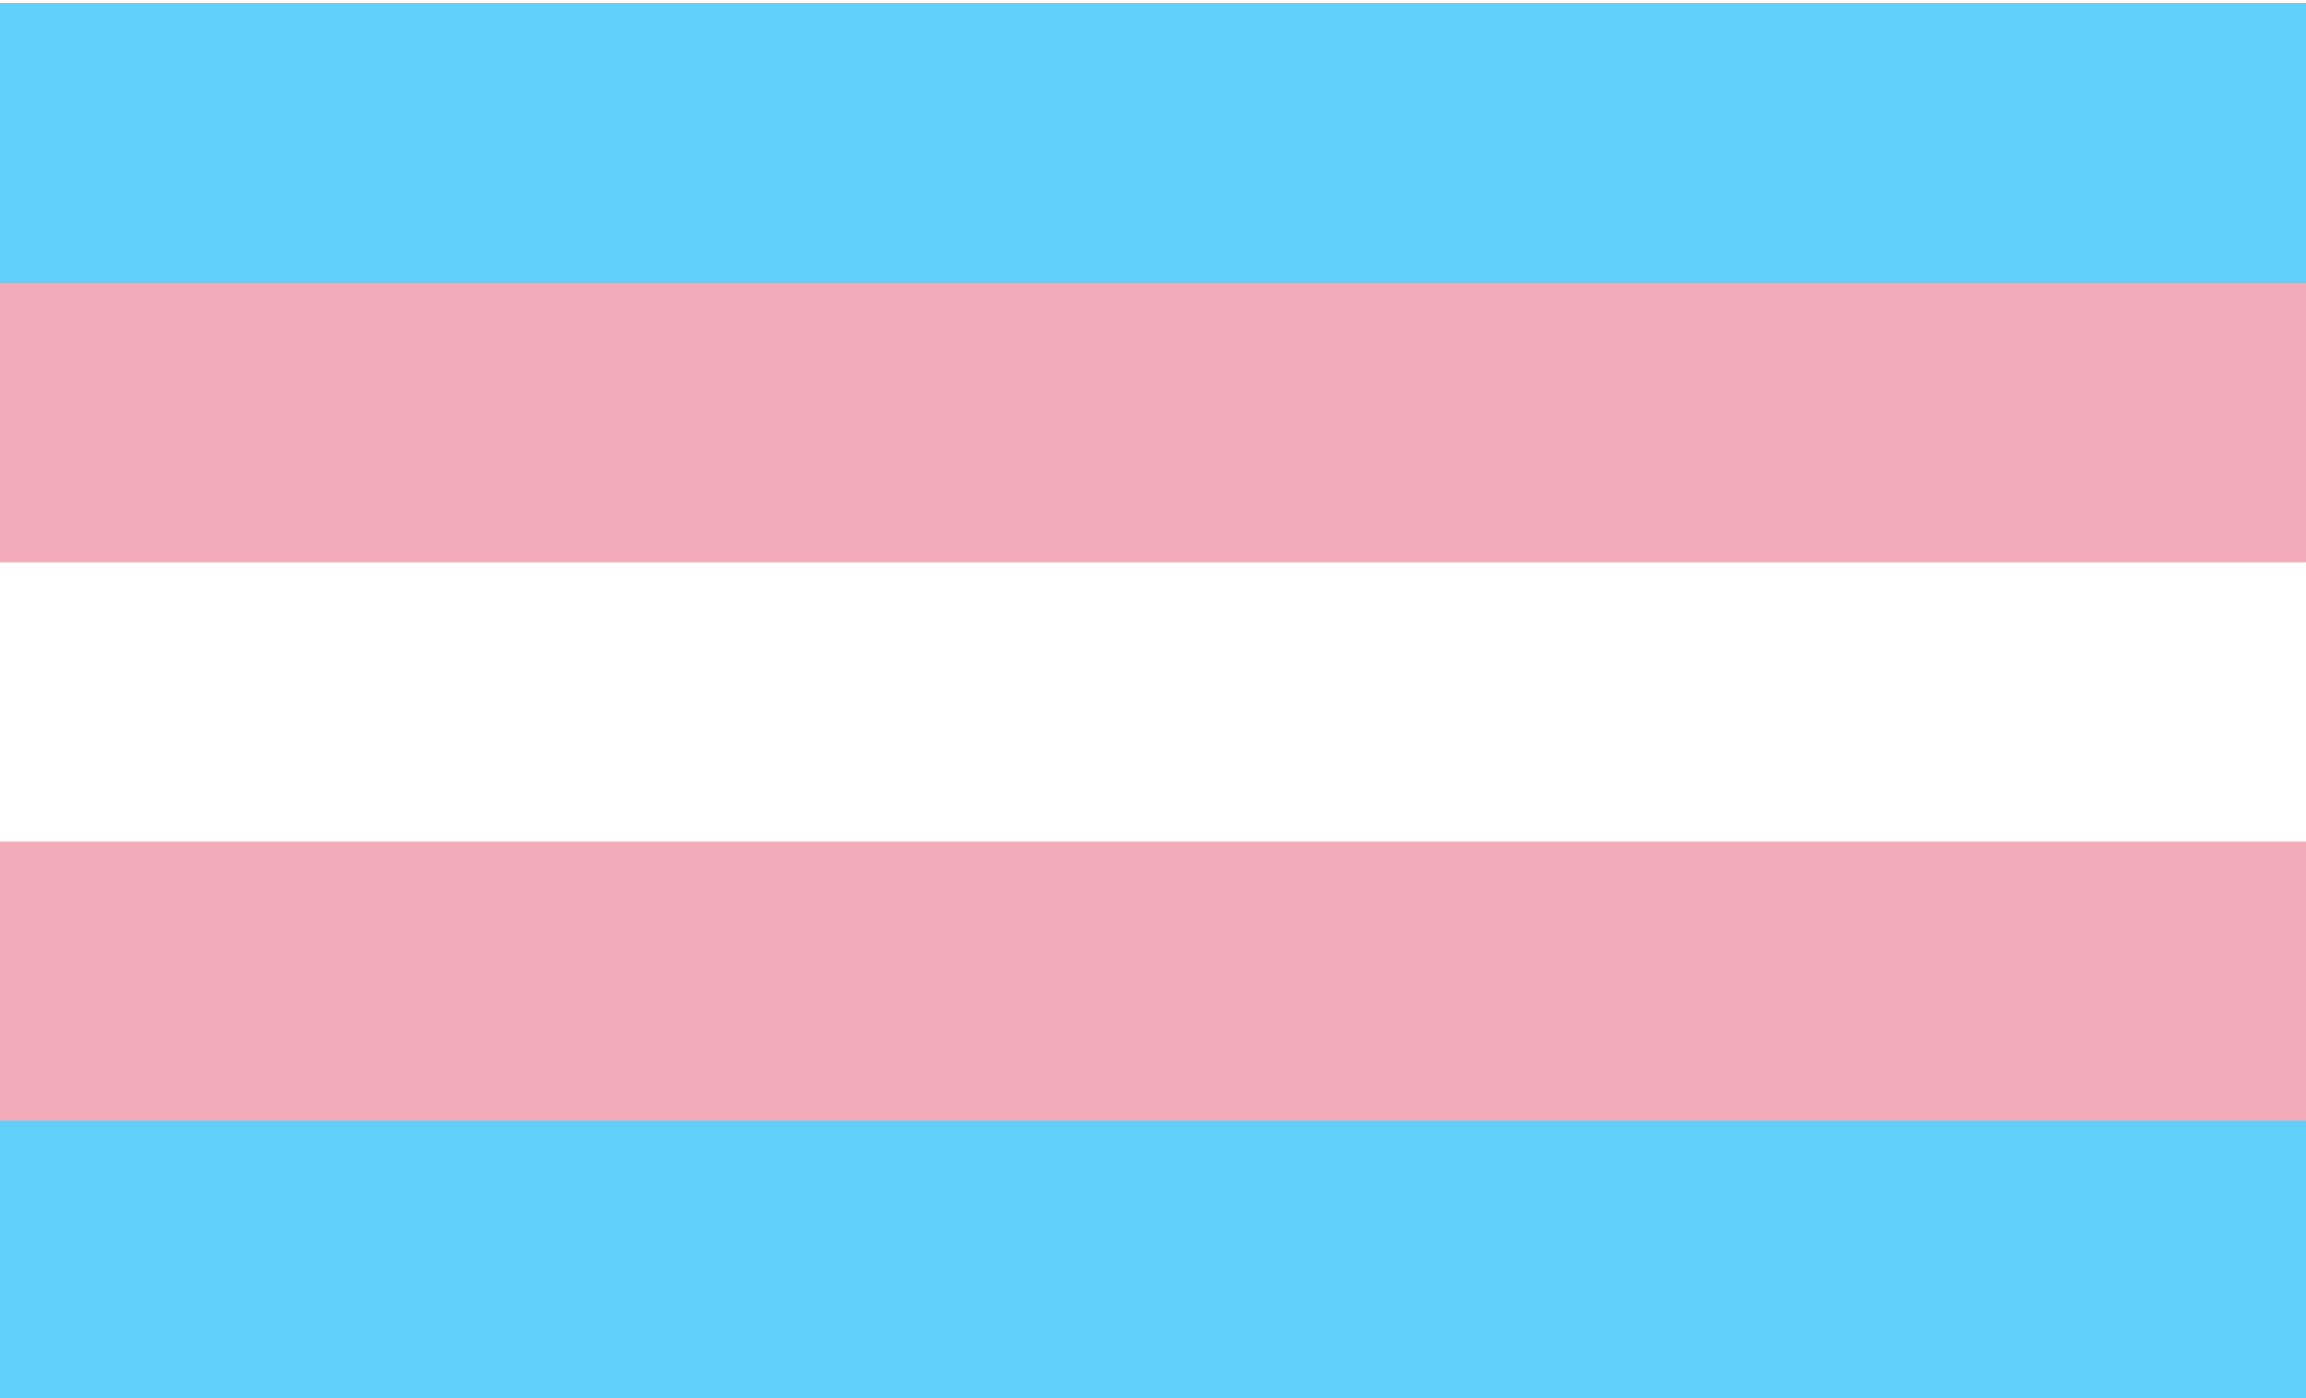 Decoration only: A graphic depicting the trans flag with light blue stripes on the top and bottom of the flag, followed by pink stripes inside and a white strip through the middle.